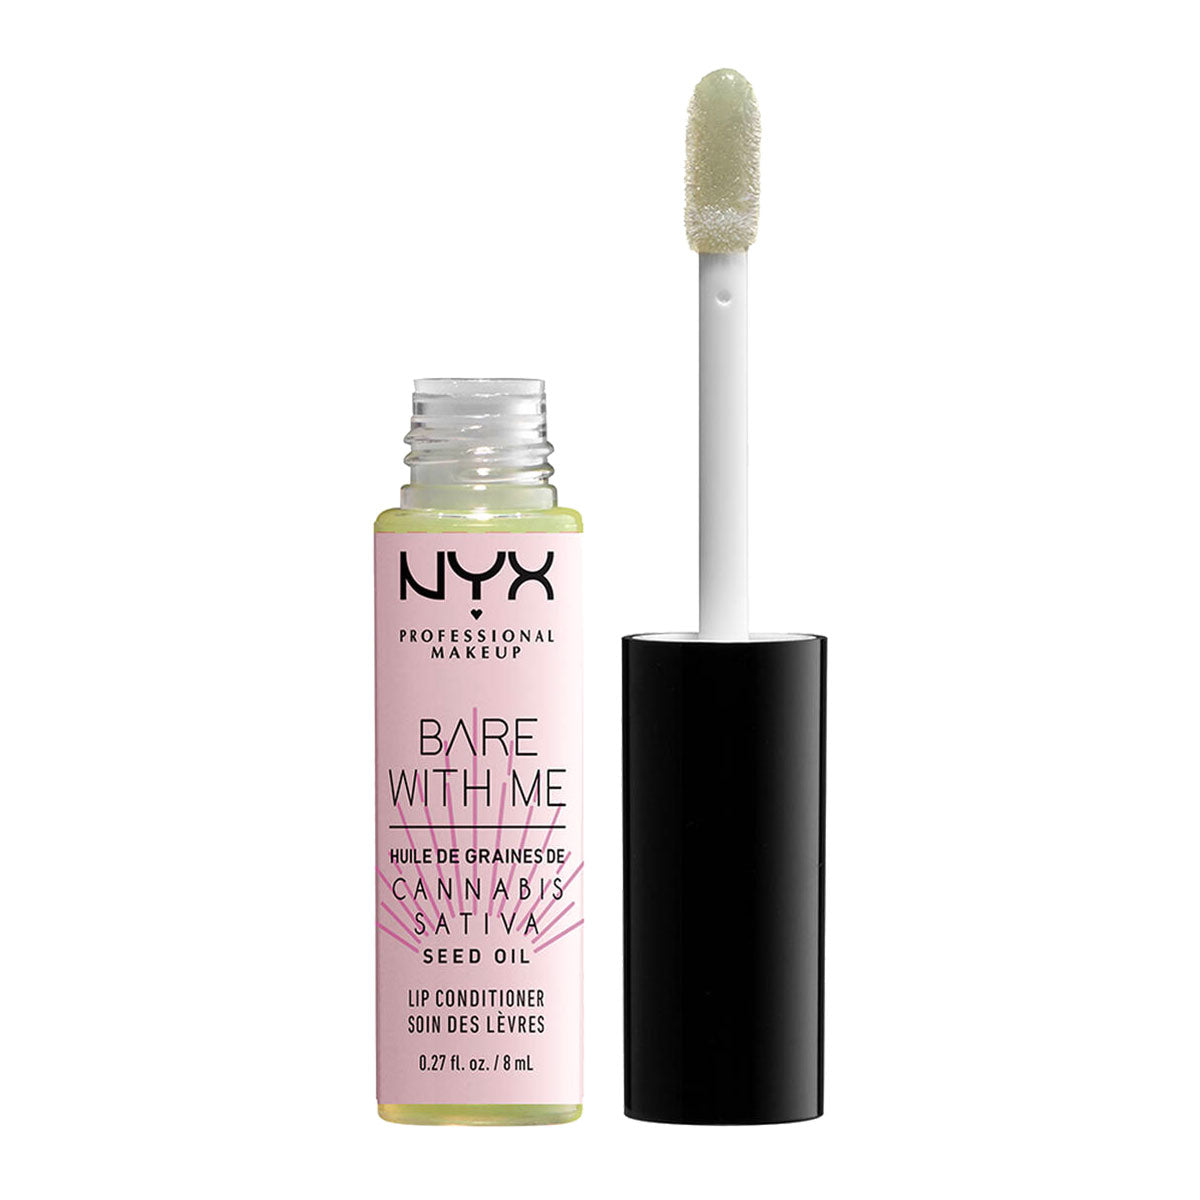 NYX Bare With Me Cannabis Sativa Seed Oil Lip Conditioner | Sheer Leaf